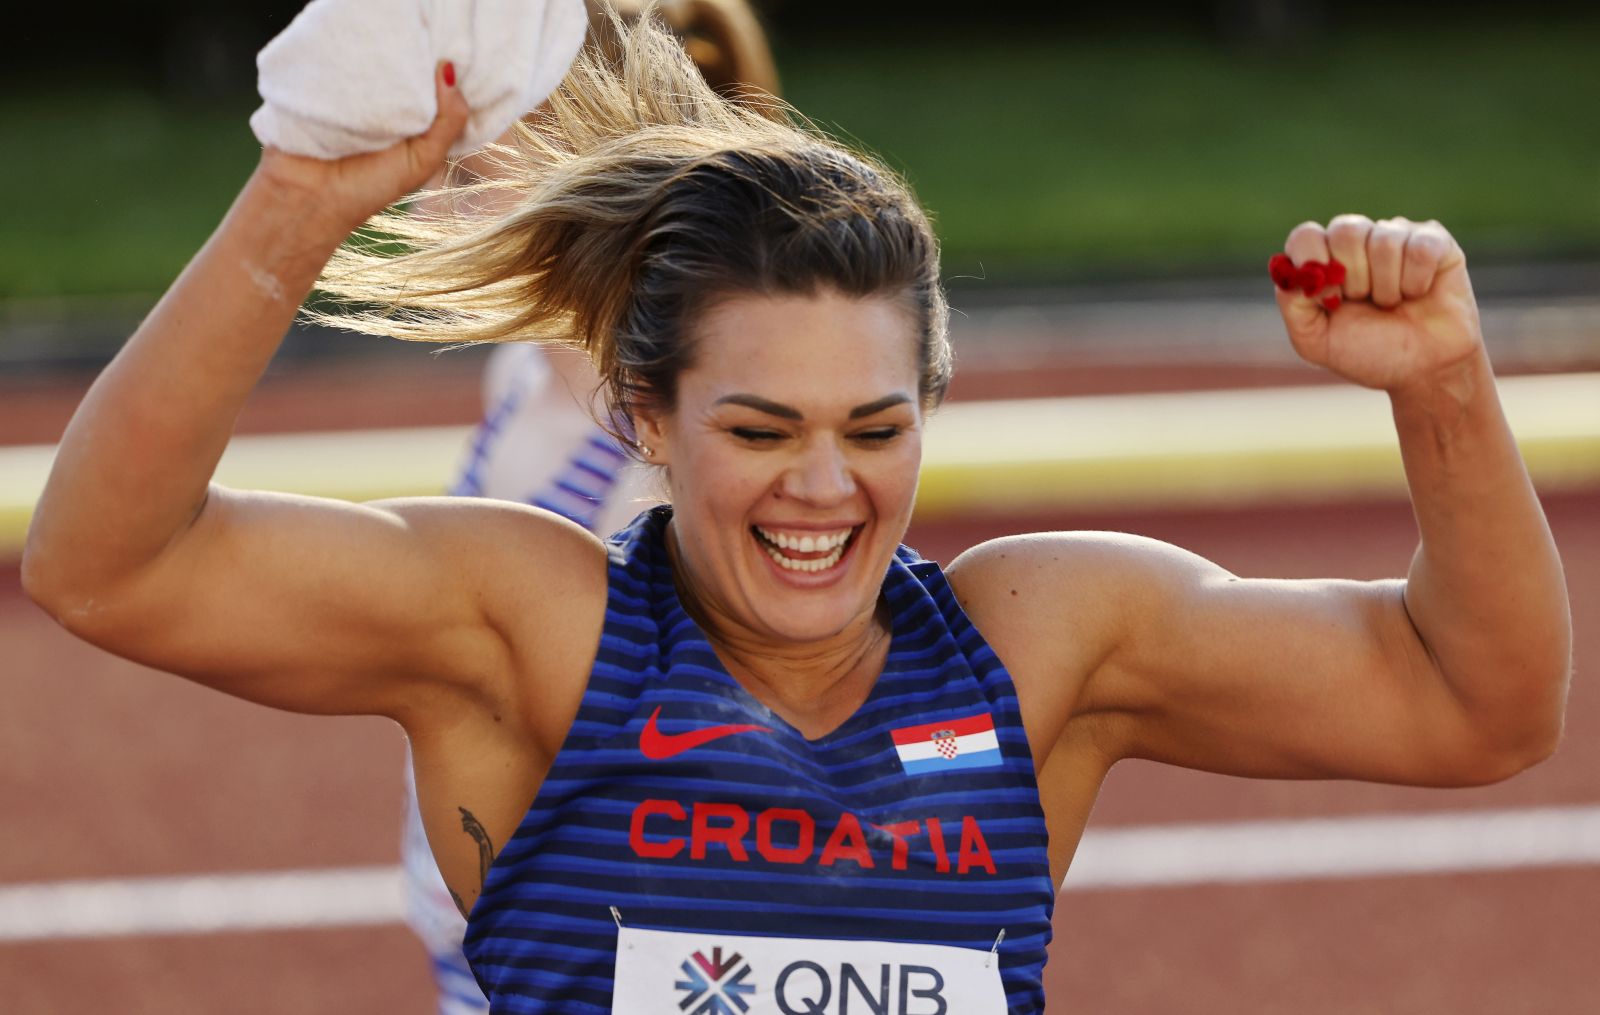 epa10083422 Sandra Perkovic of Croatia, celebrates after winning second place in the women’s Discus Throw final, during the World Athletics Championships Oregon22, at Hayward Field, in Eugene, Oregon, USA, 20 July 2022.  EPA/CJ Gunther